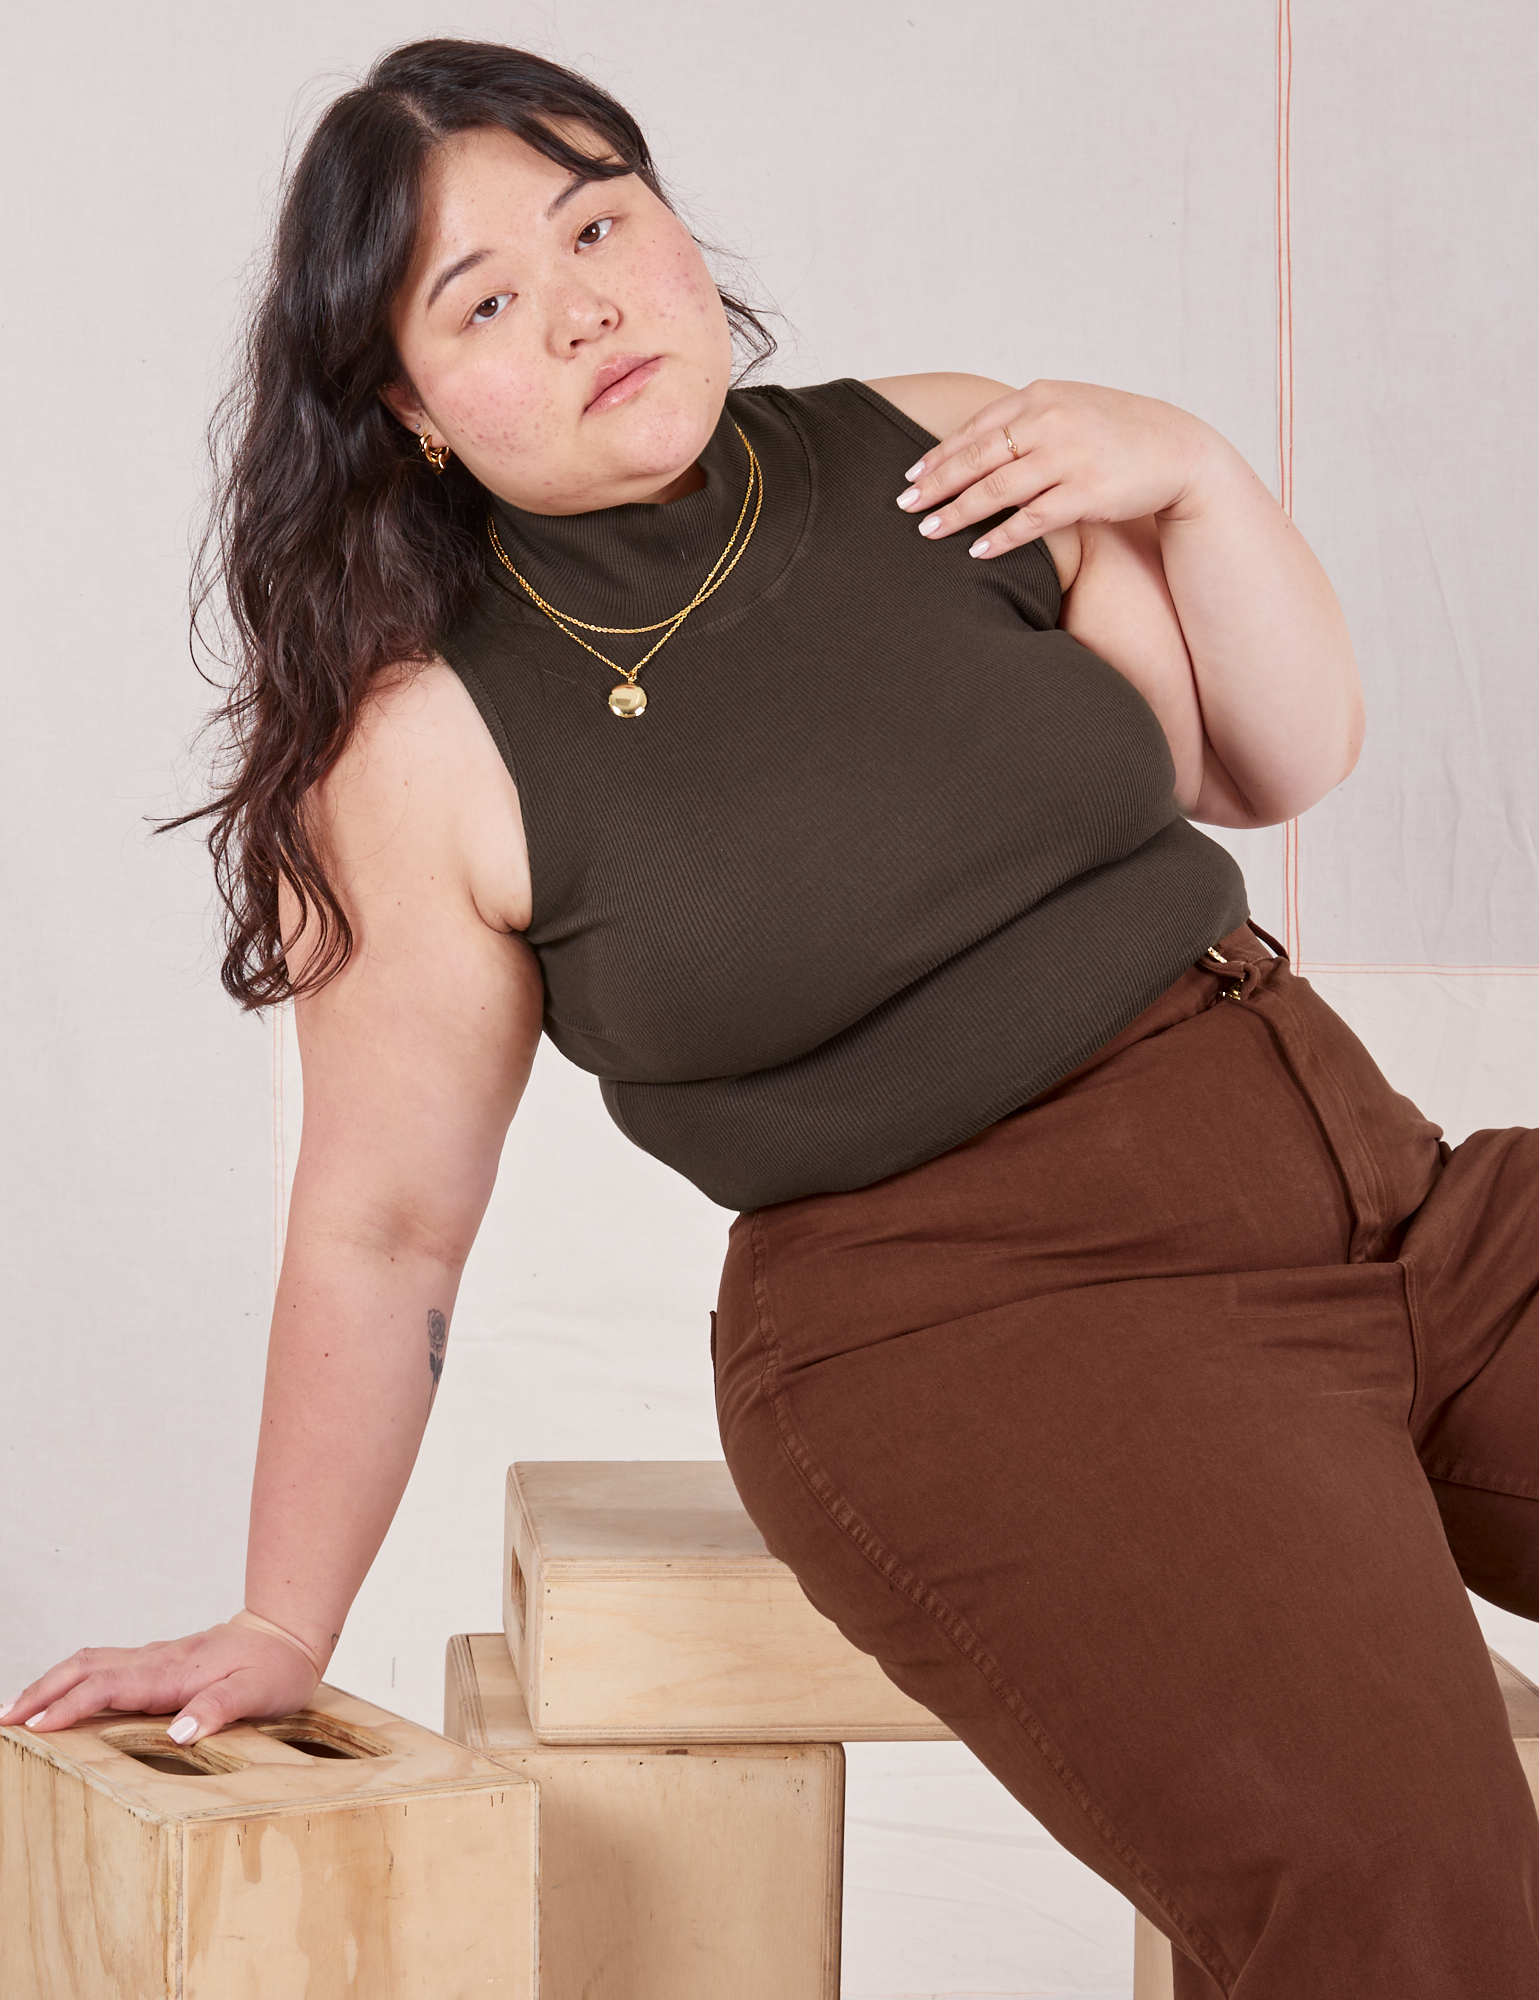 Ashley is wearing Sleeveless Essential Turtleneck in Espresso Brown and fudgesicle brown Bell Bottoms